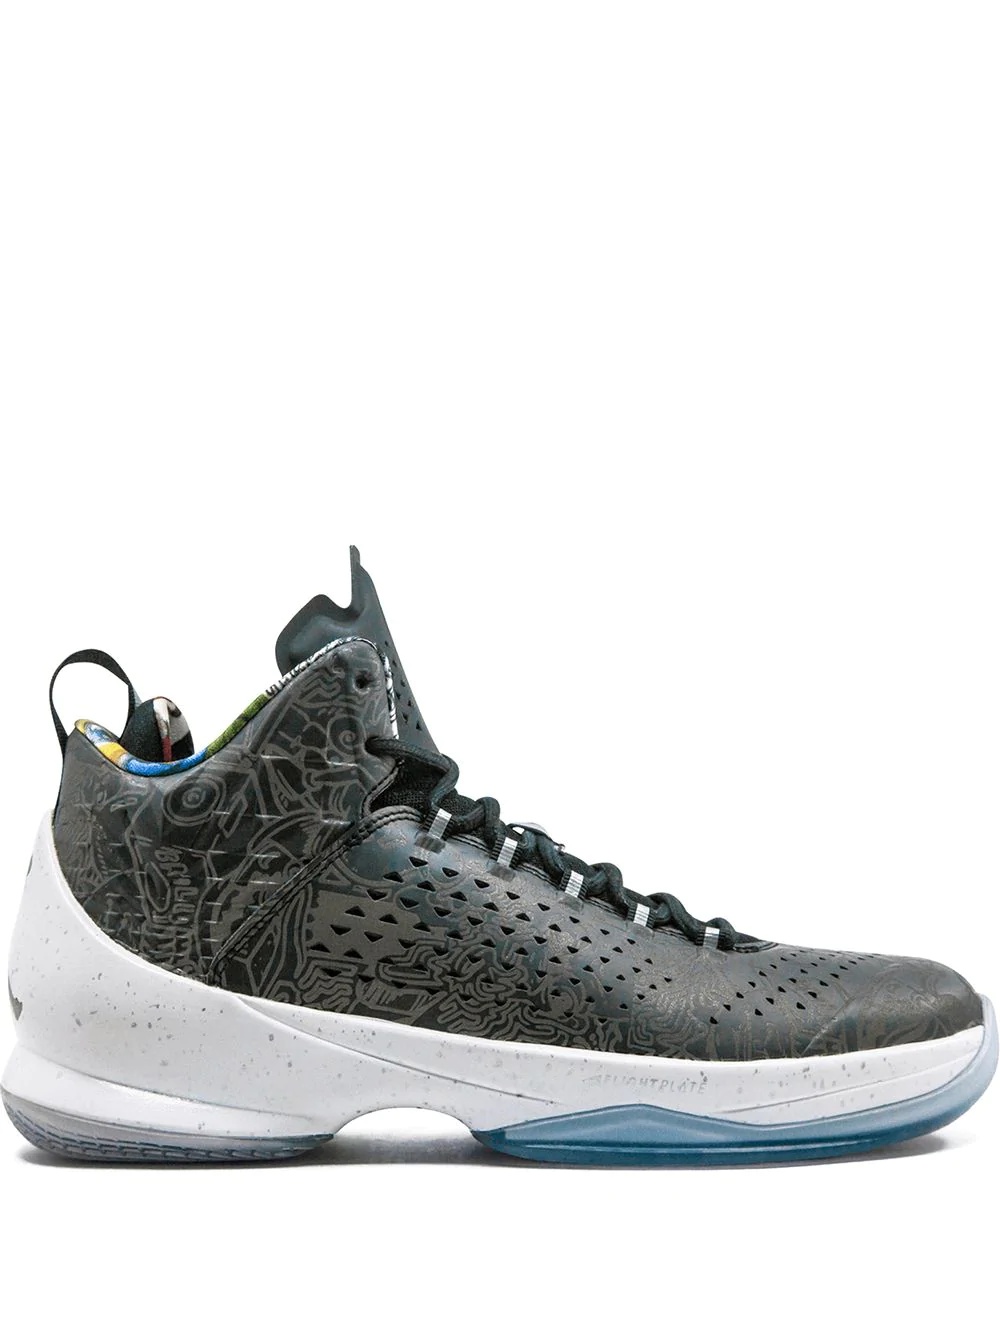 Melo M11 sneakers - 1